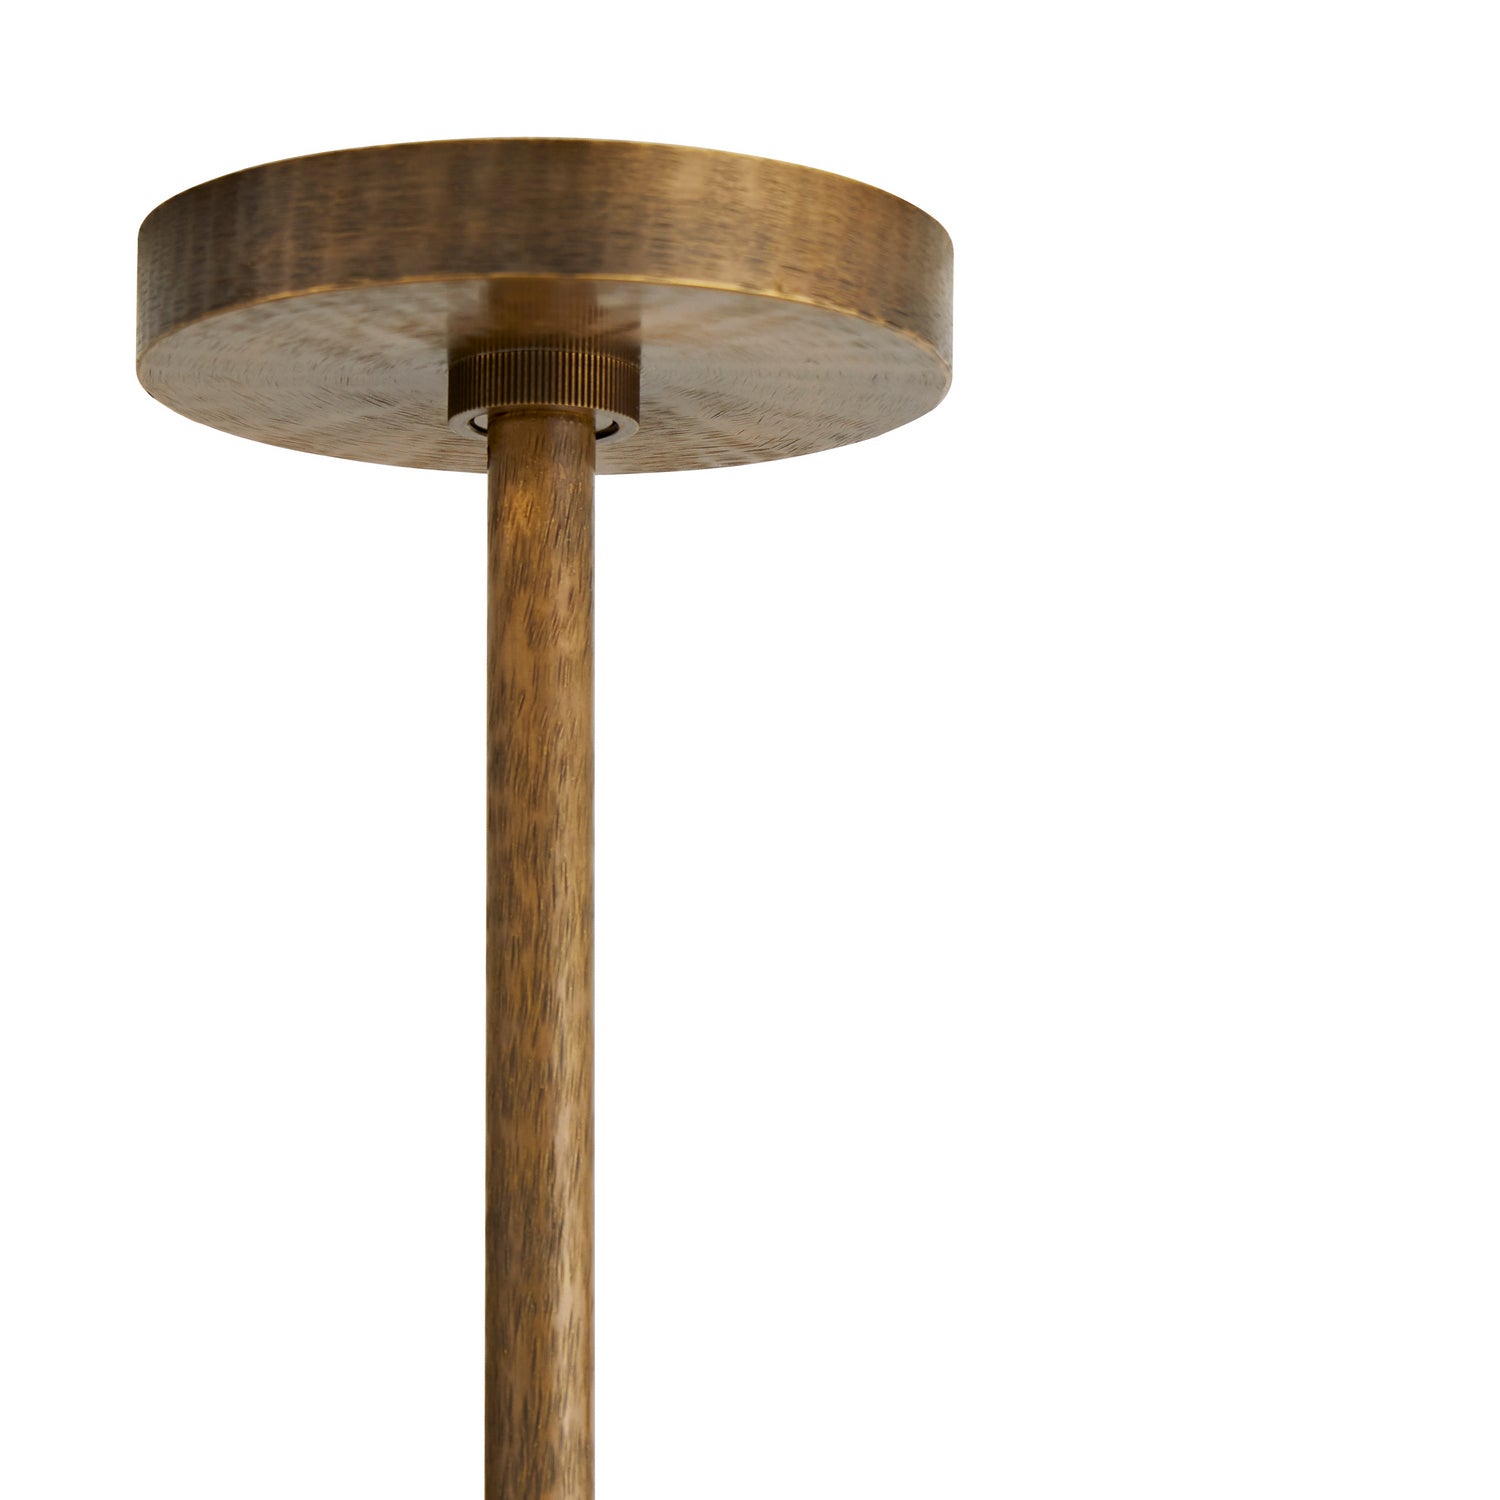 Eight Light Chandelier from the Griff collection in Antique Brass finish